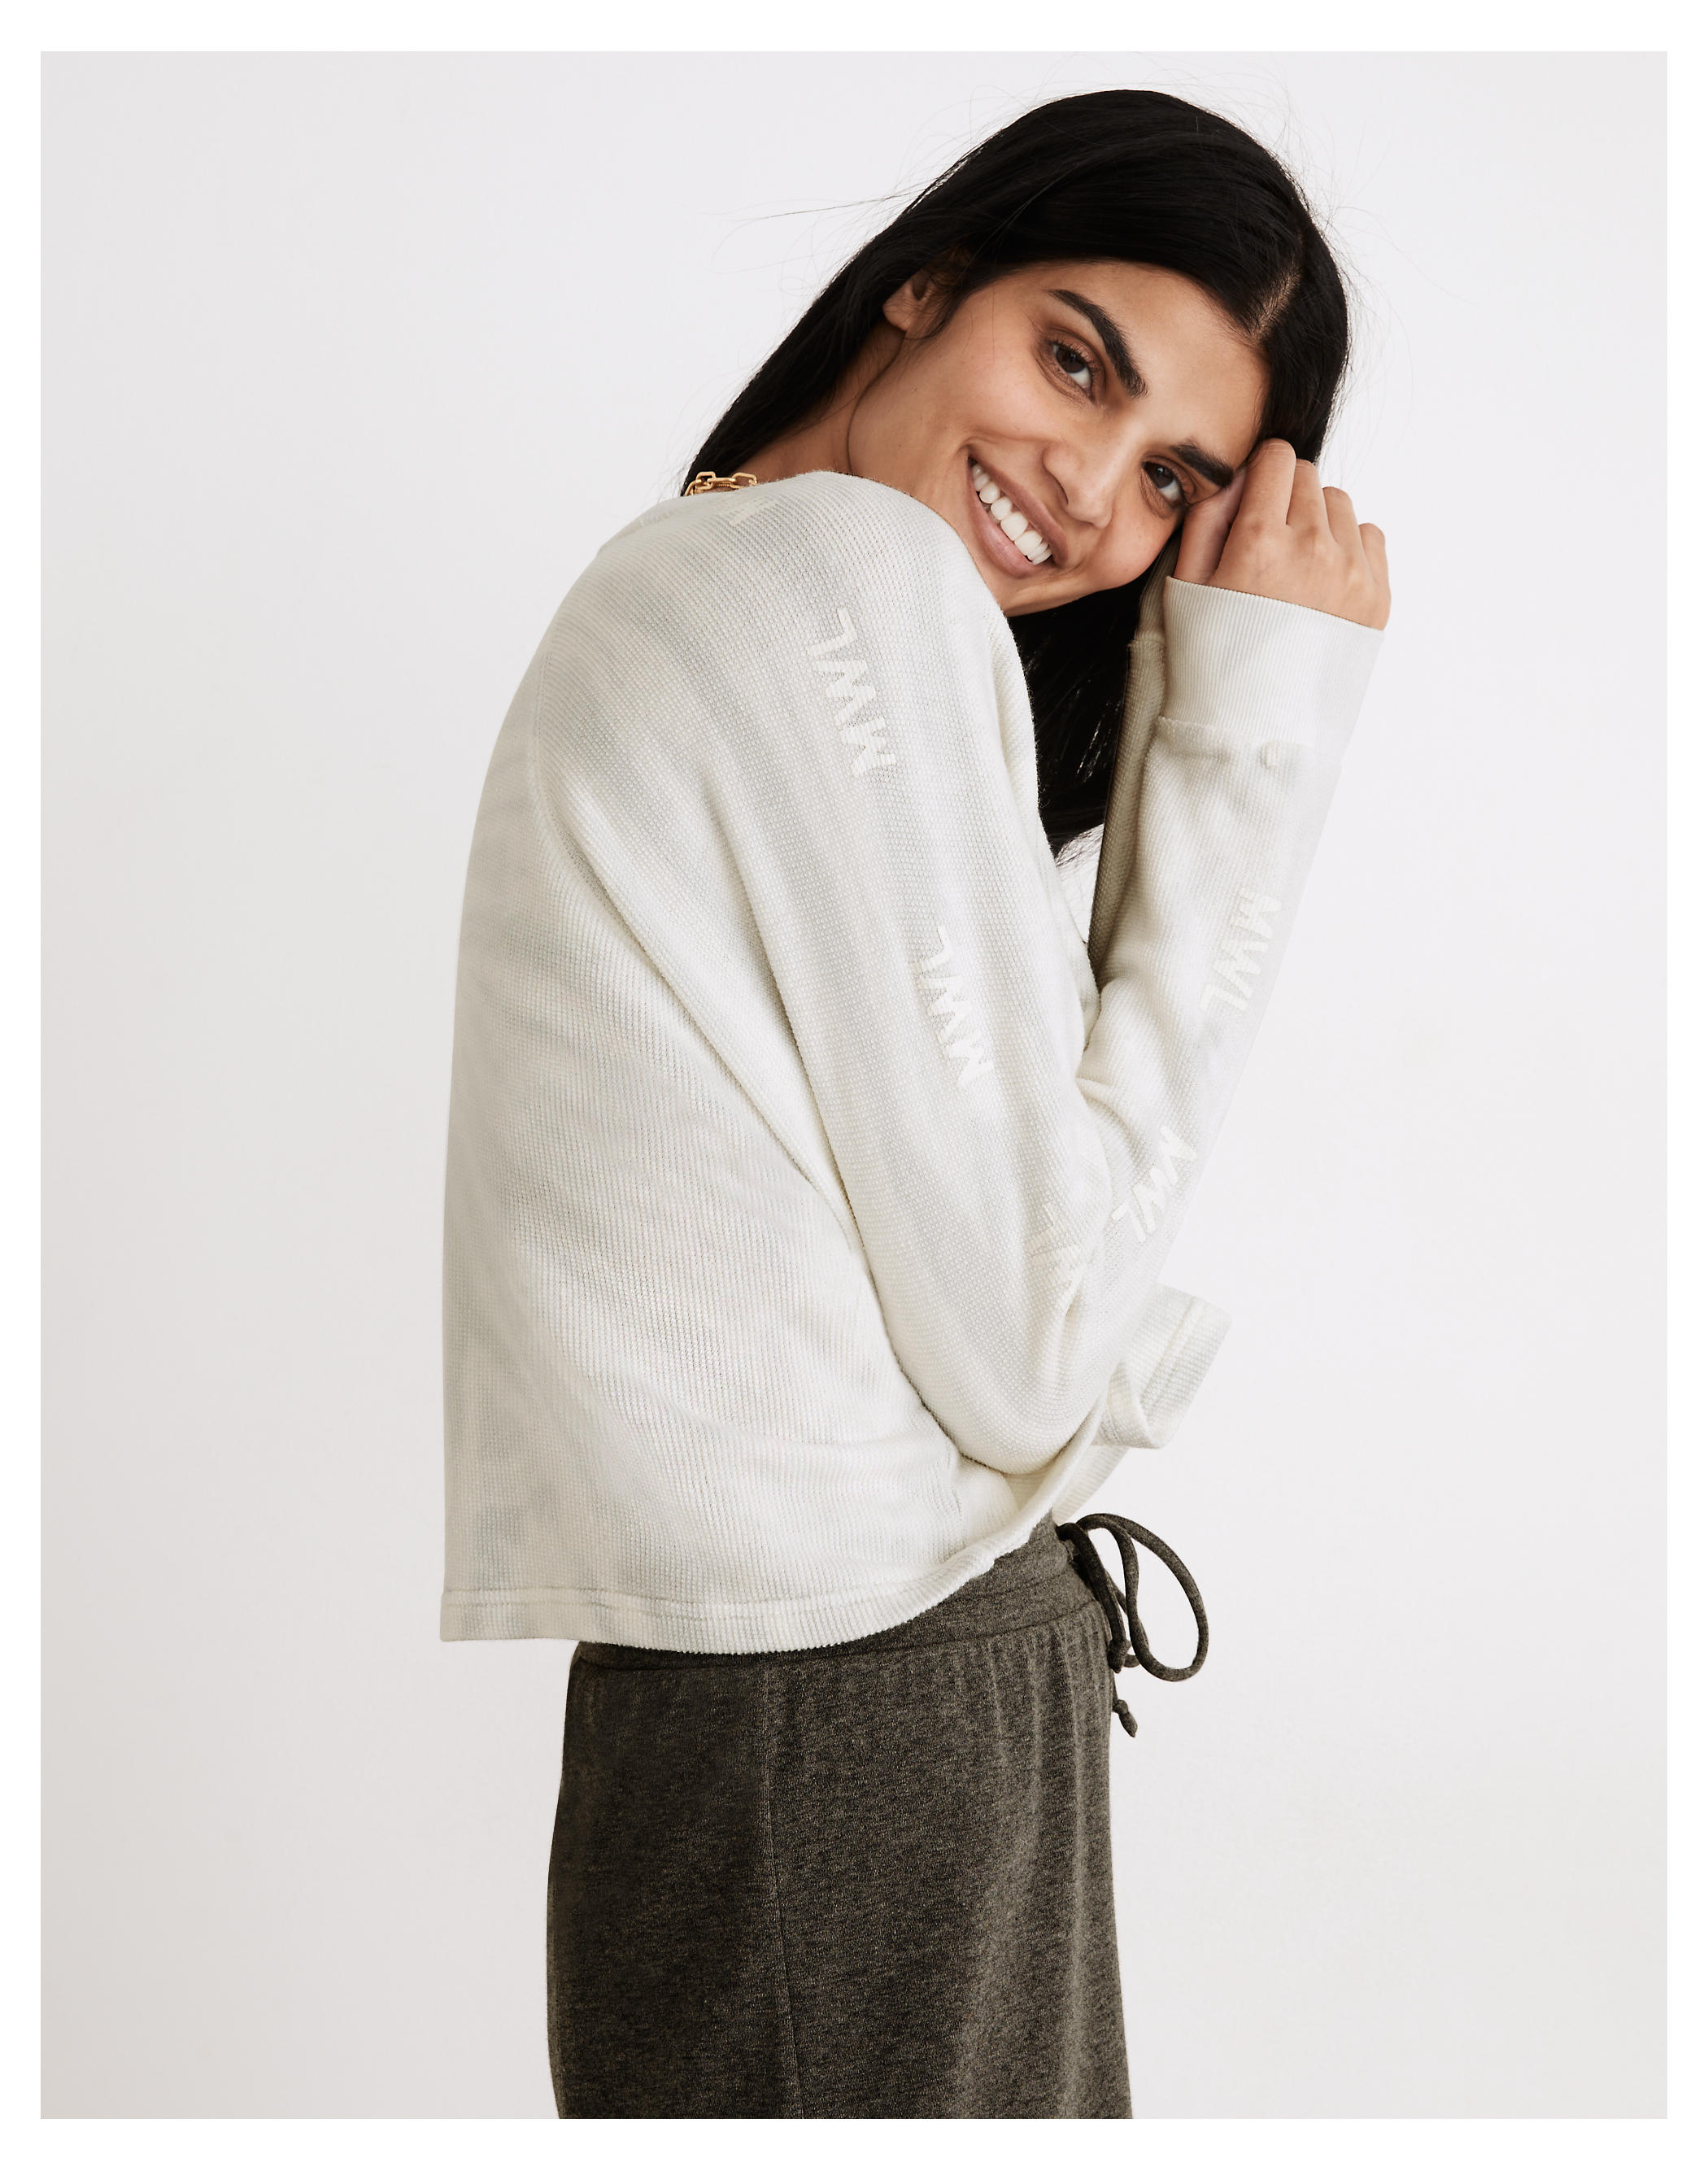 Madewell: Up to 80% Off Sale Styles